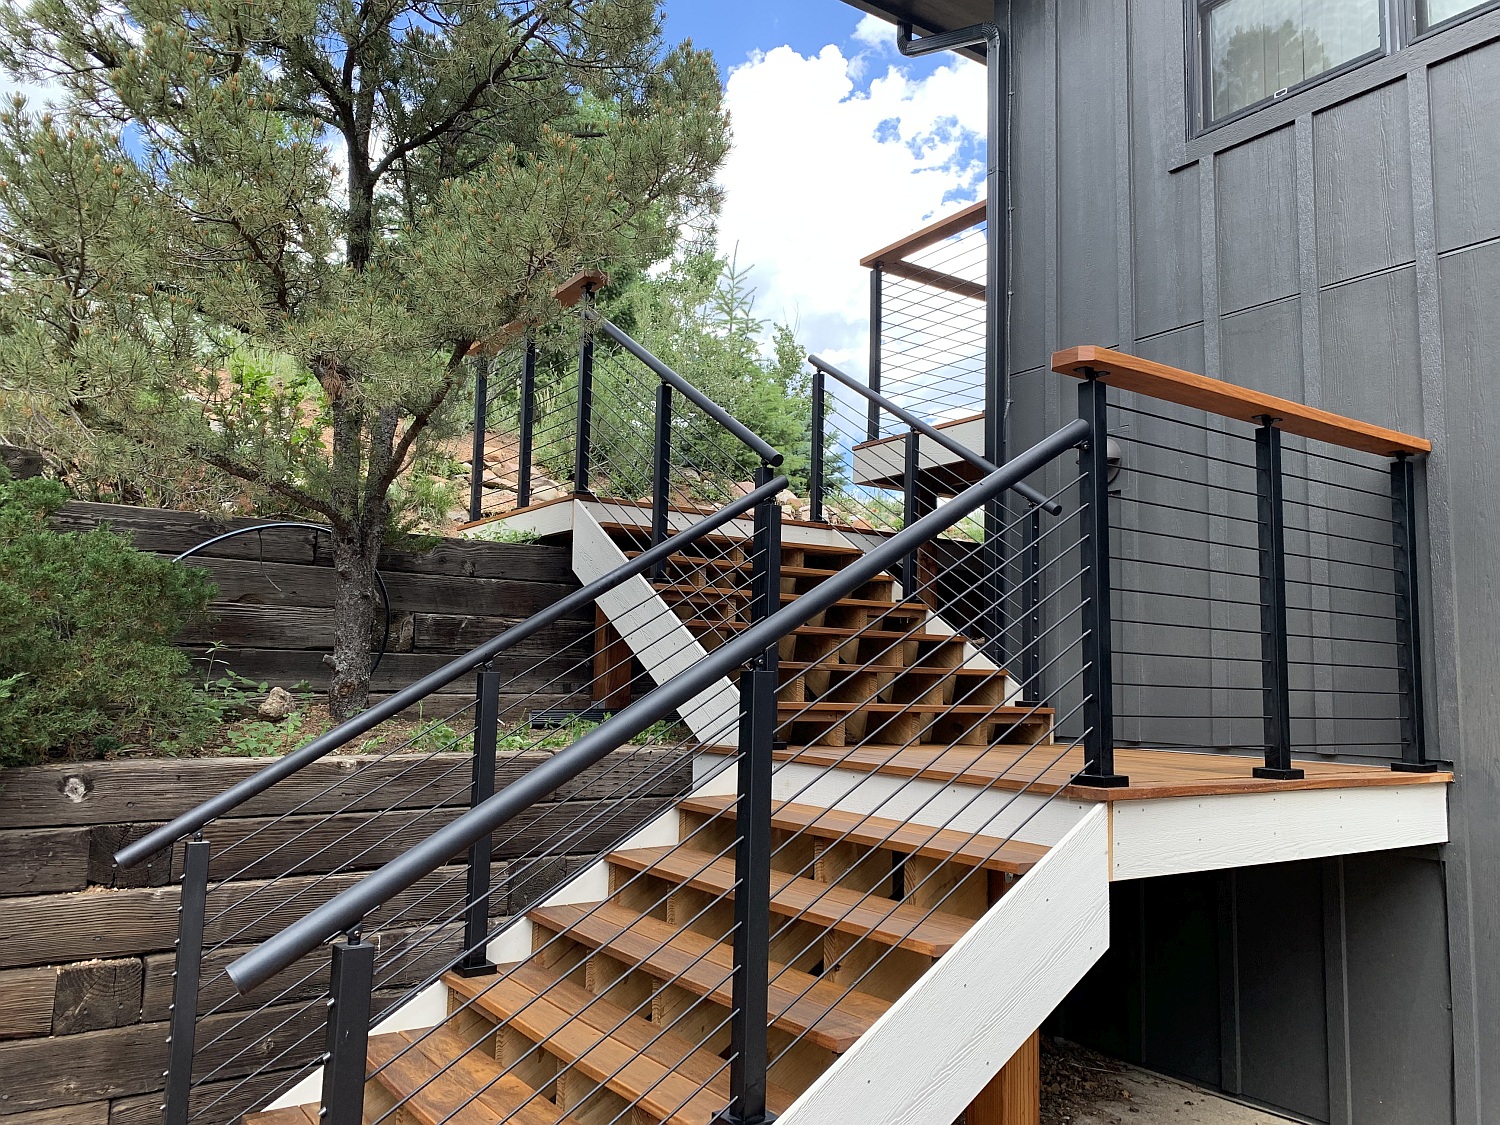 Deck stairs with a landing done in Cumaru hardwood. The railing is a custom ViewRail Onyx system in matte black